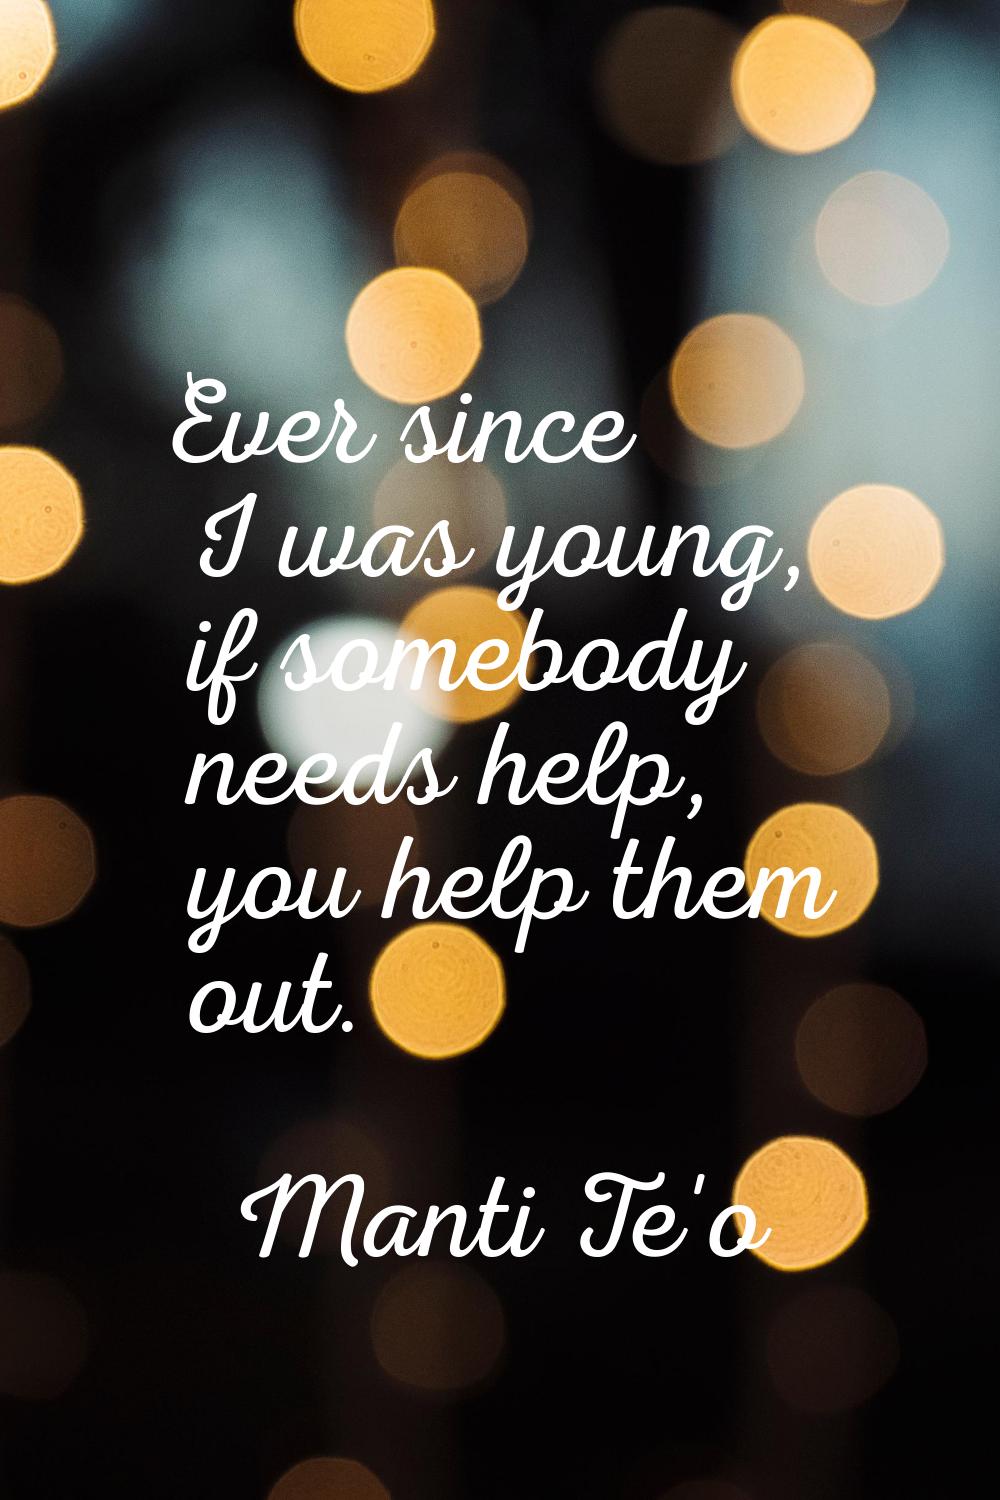 Ever since I was young, if somebody needs help, you help them out.